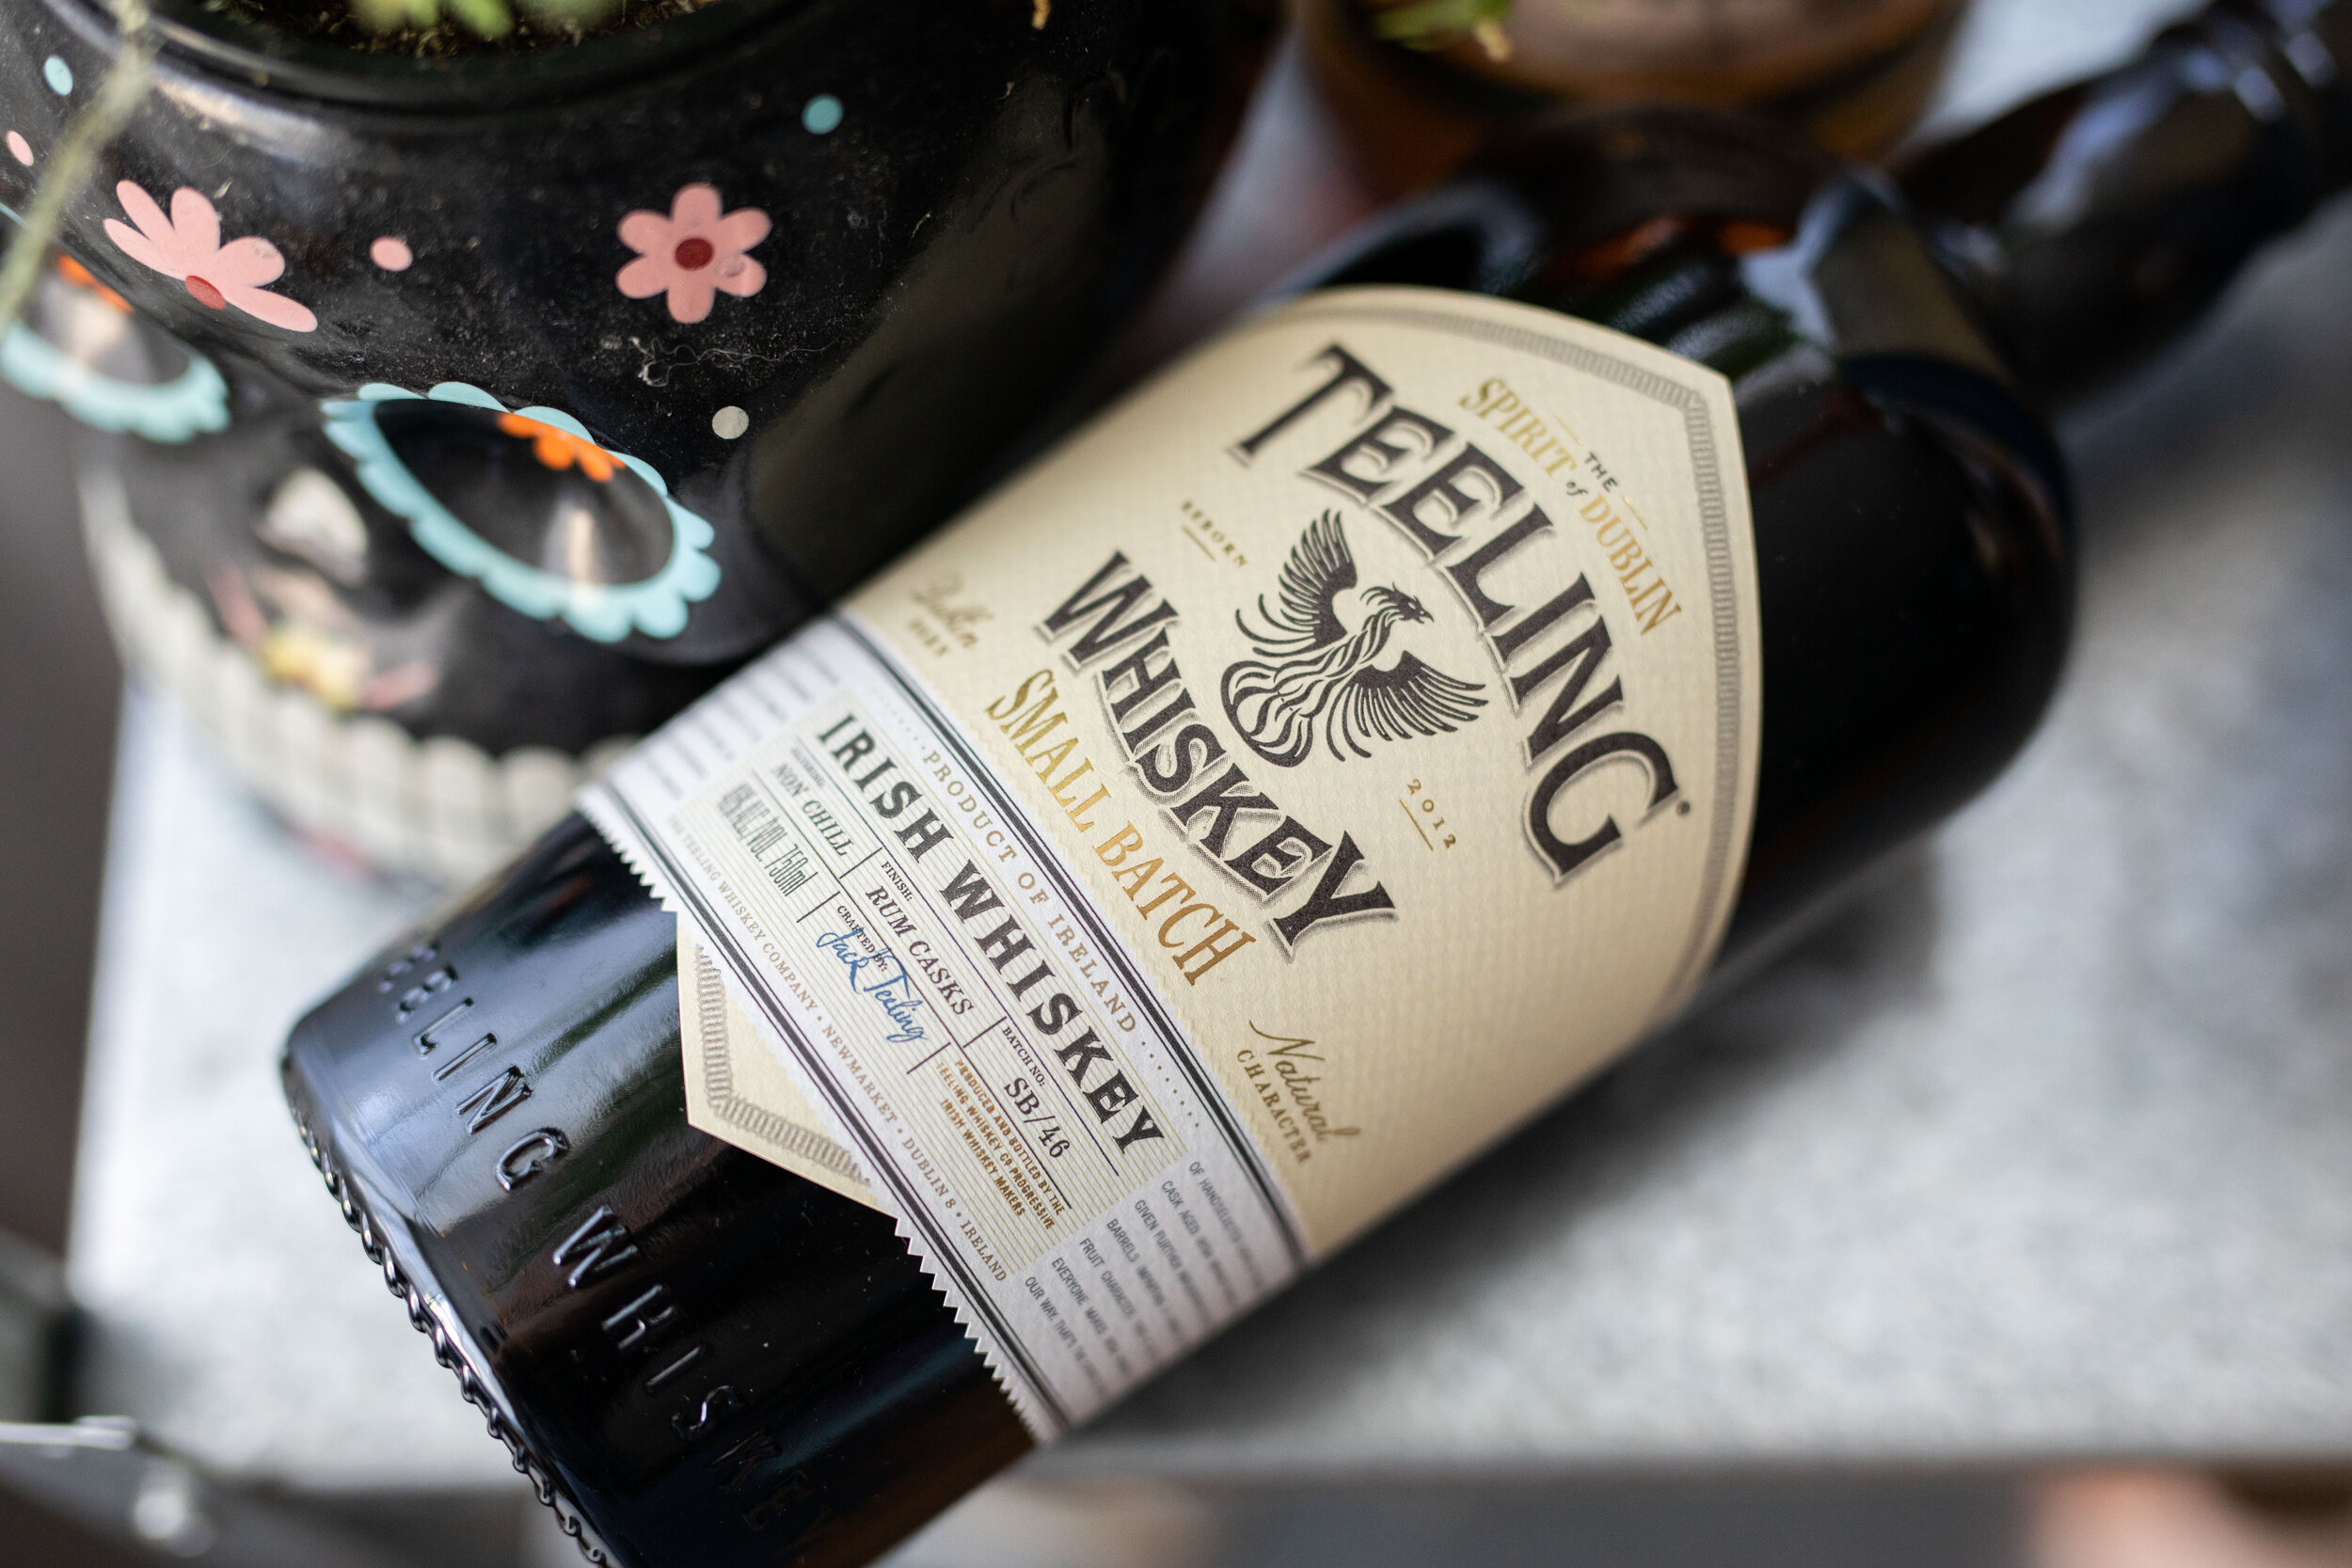 Teeling Small Batch Review — The Whisky Study